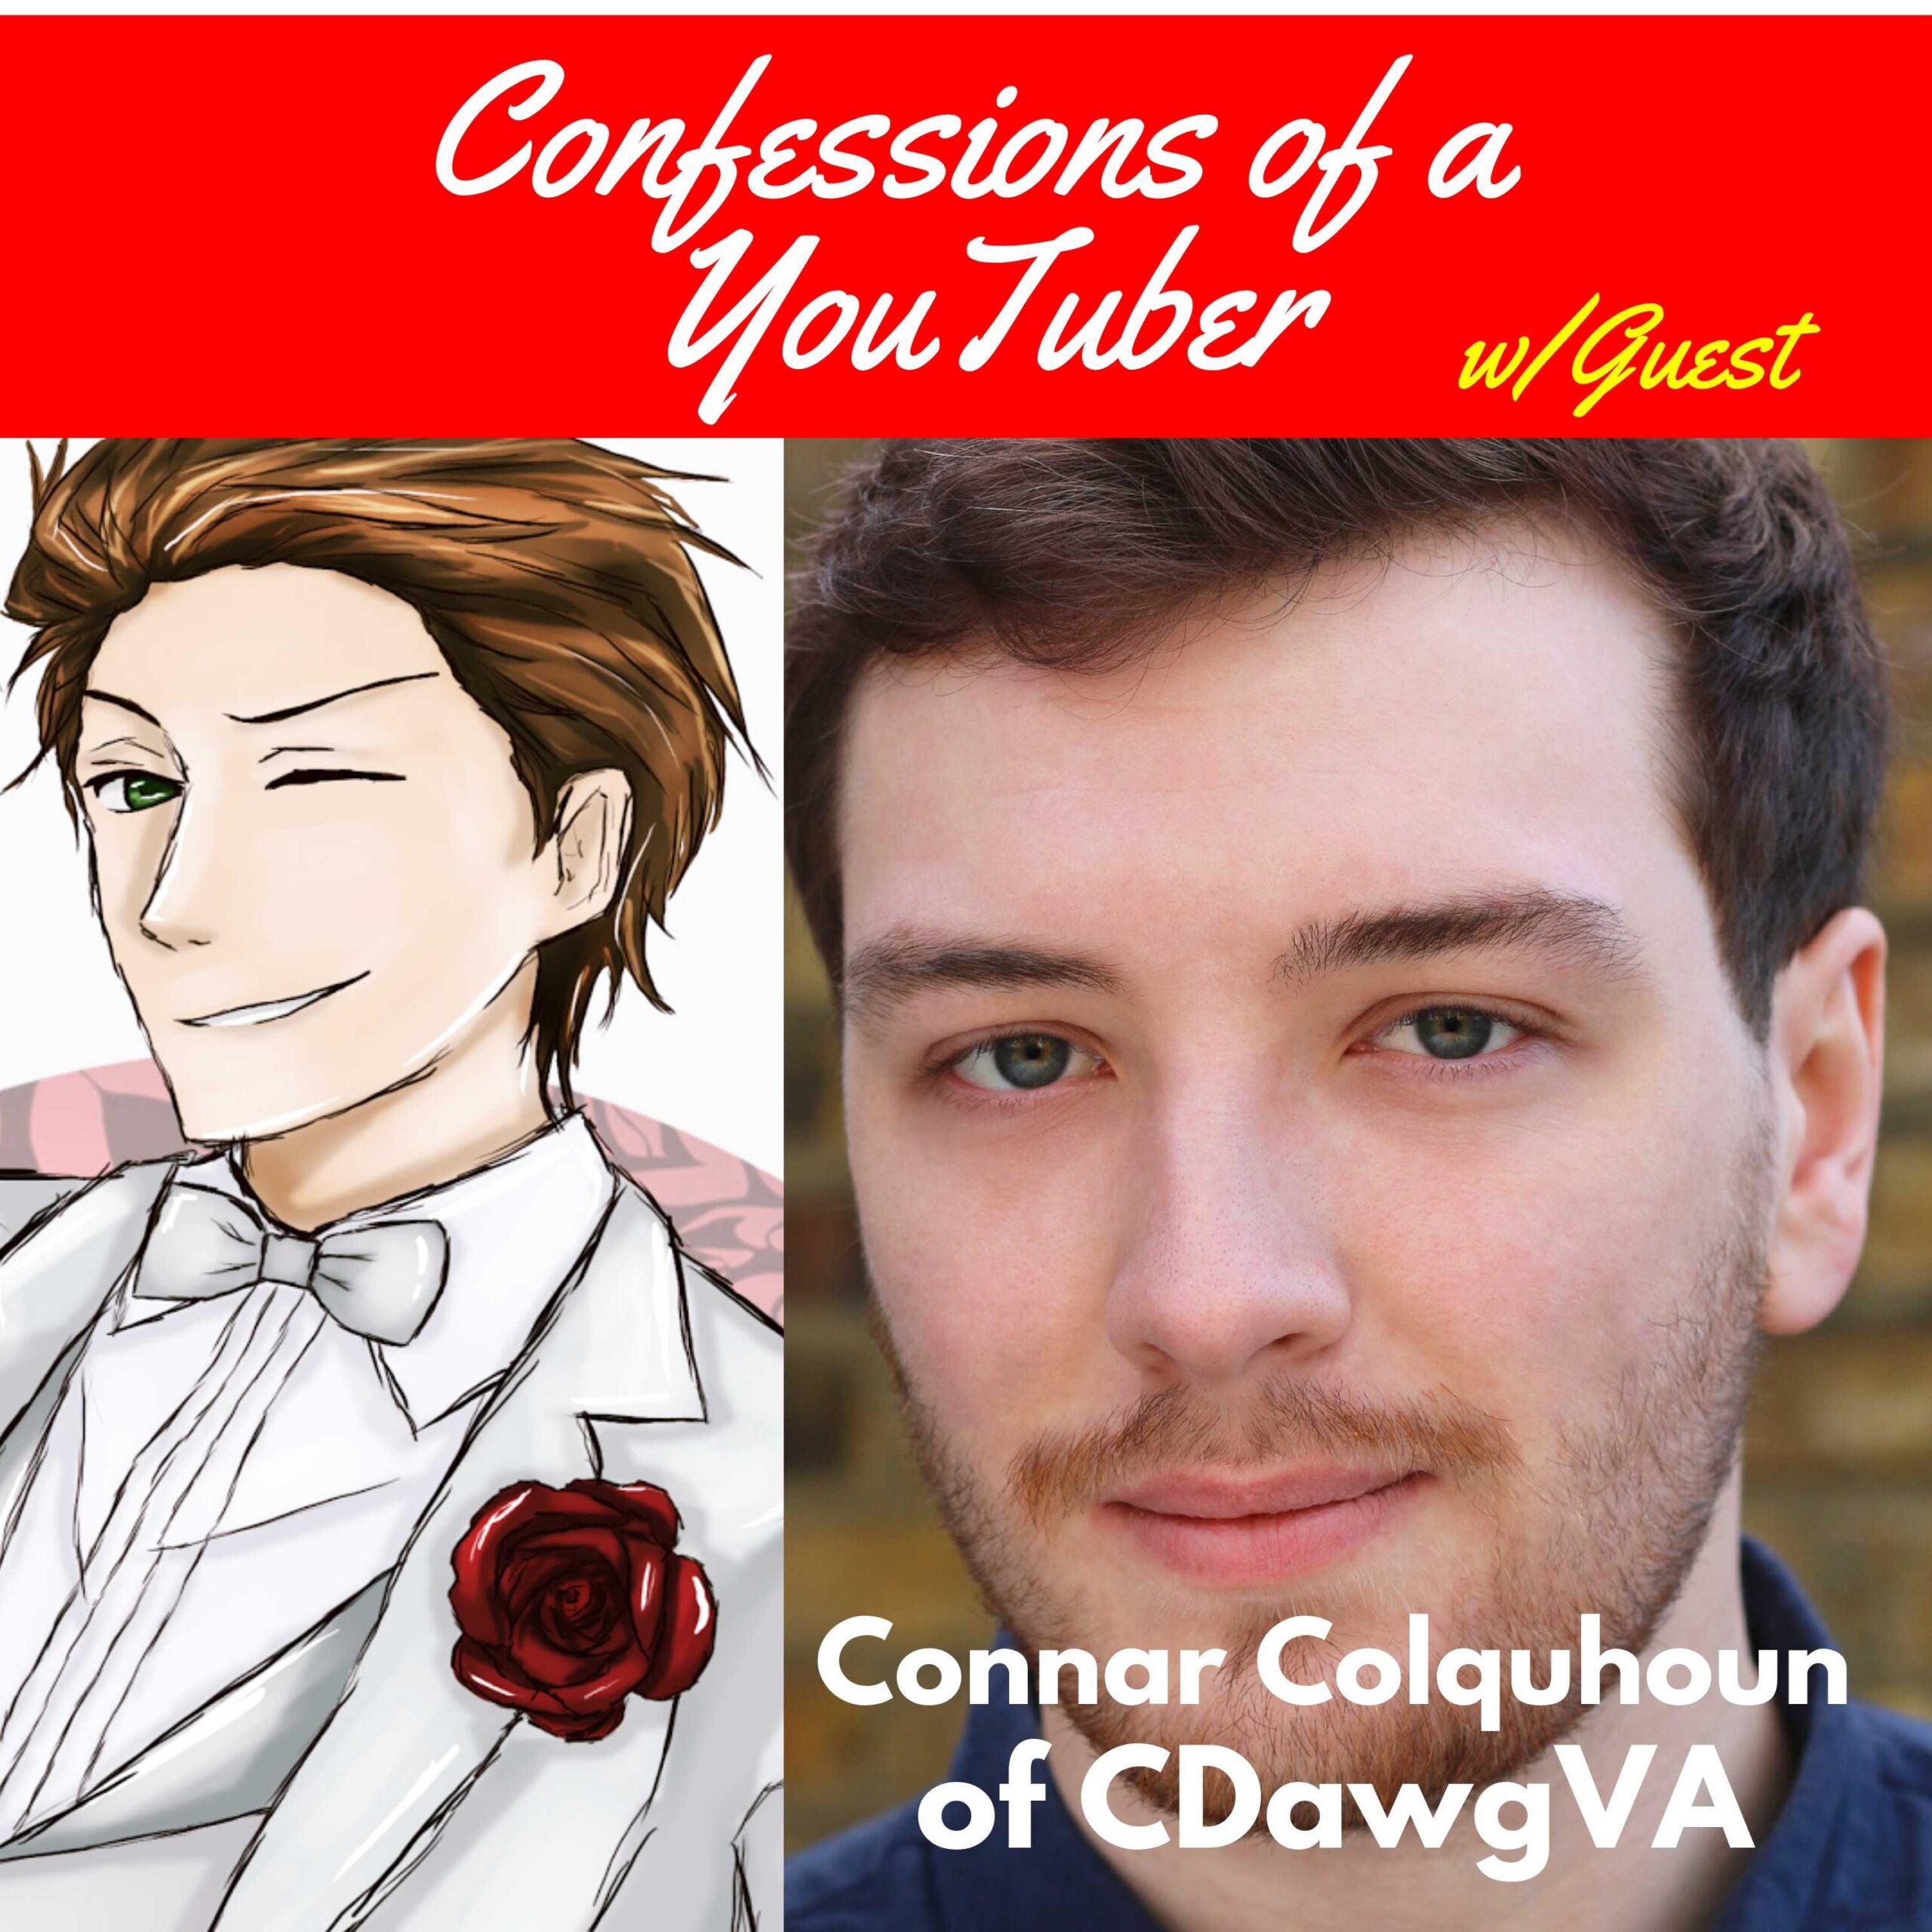 Podcast Interview with talented Voice Over artist Connor Colquhoun